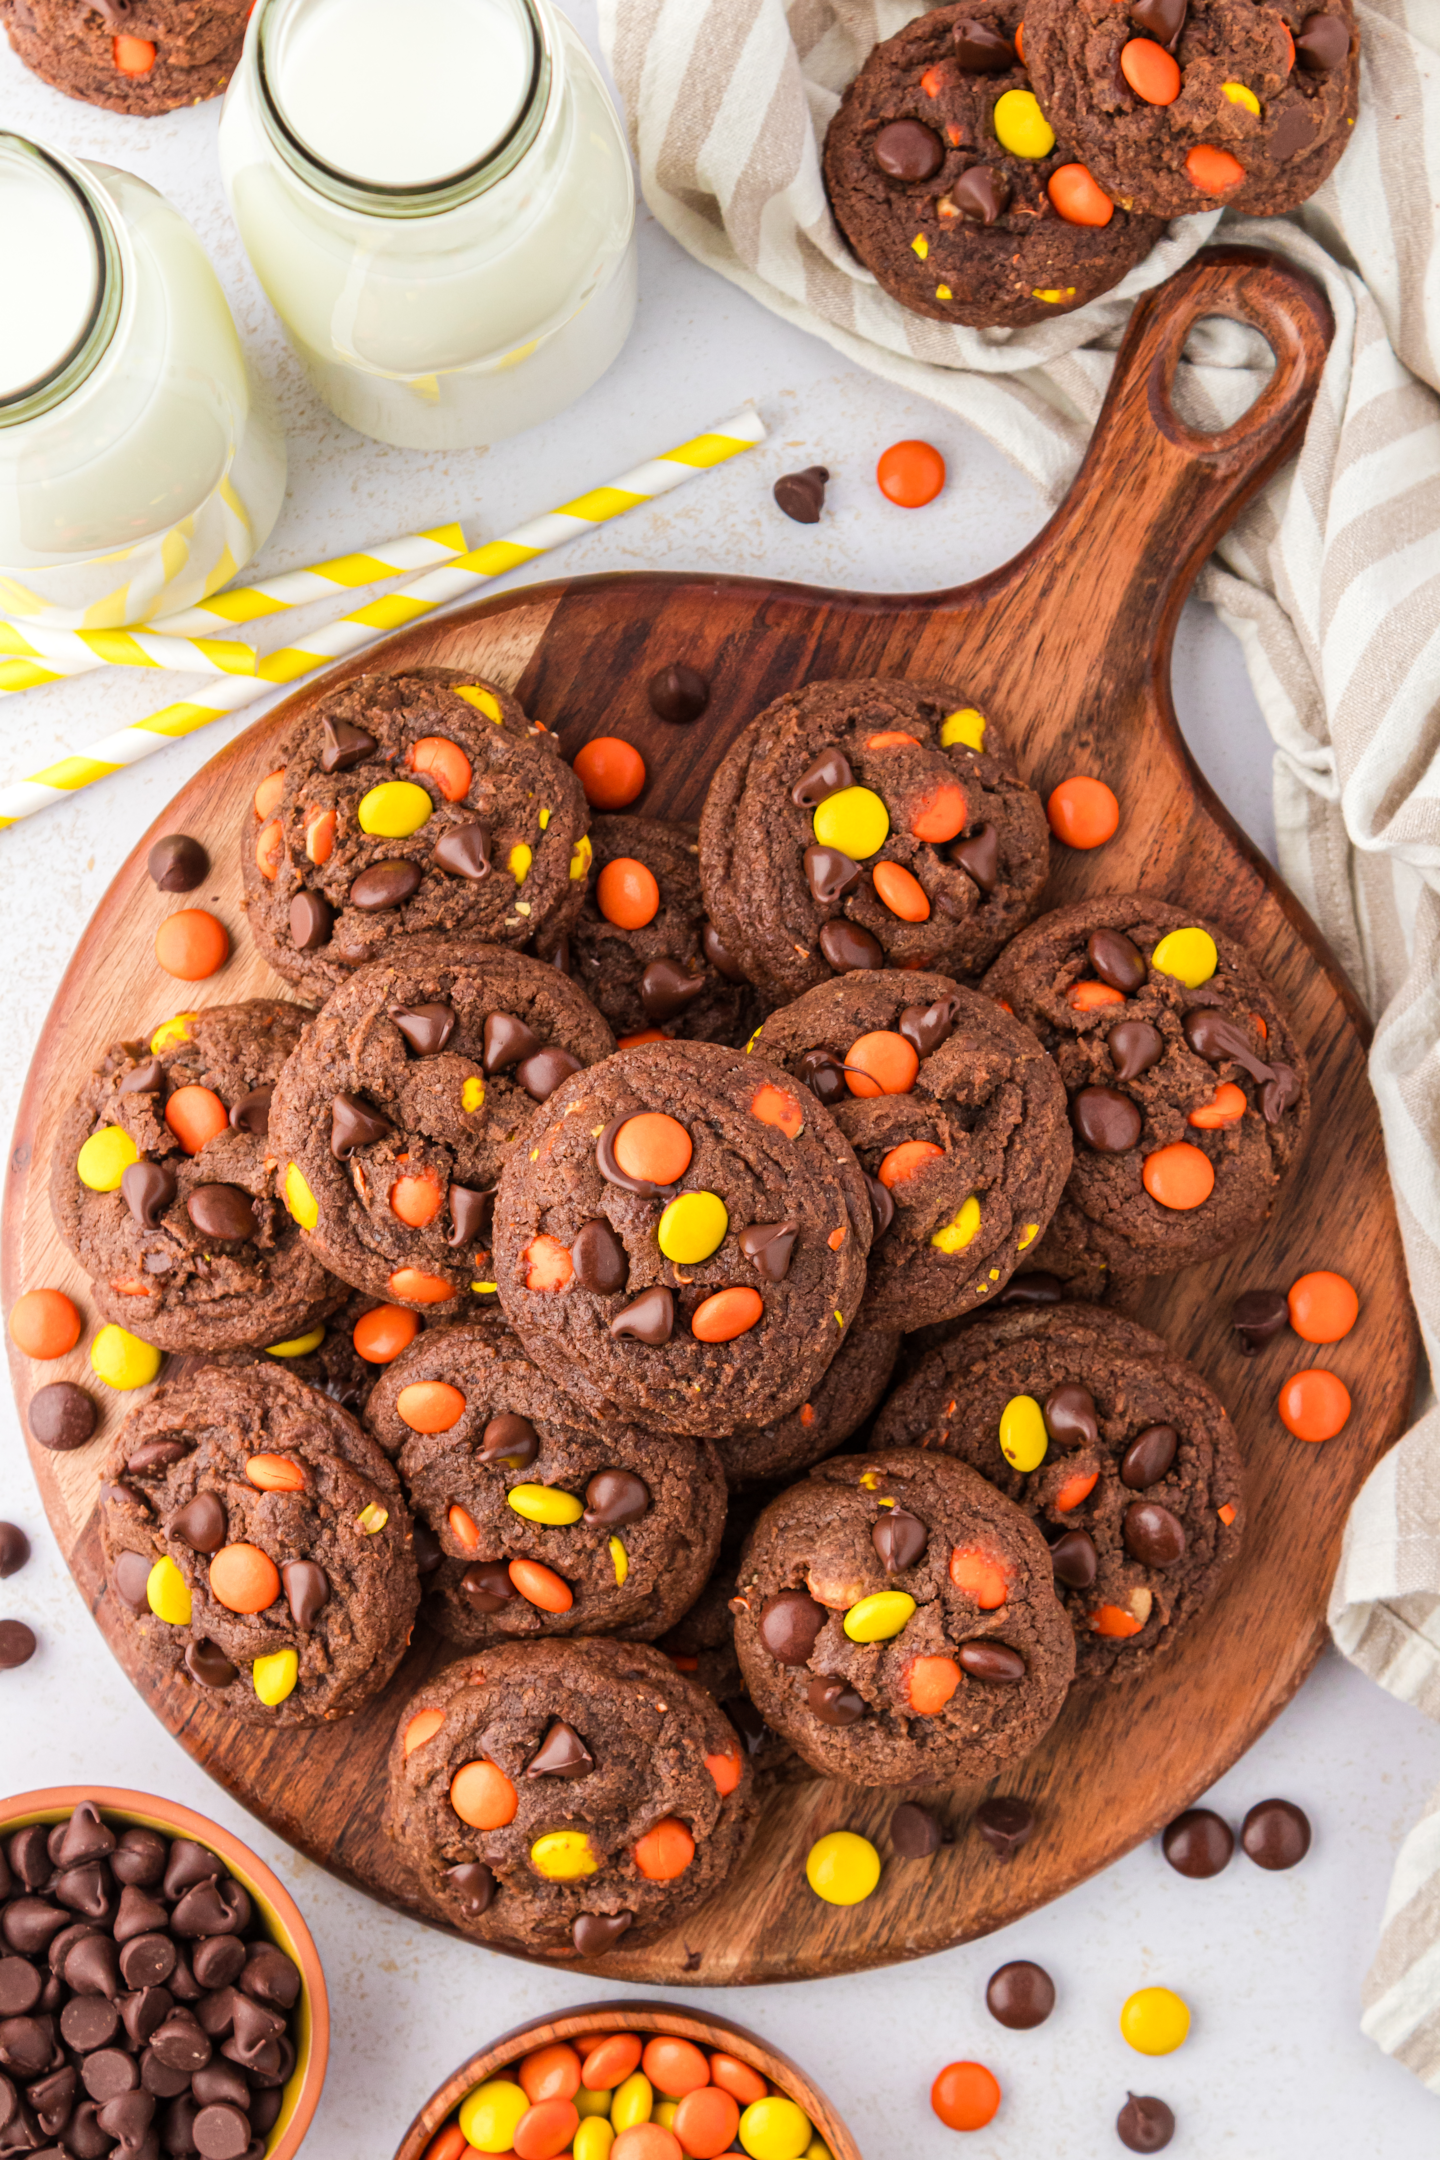 Reese's chocolate cookies on a wooden cutting board